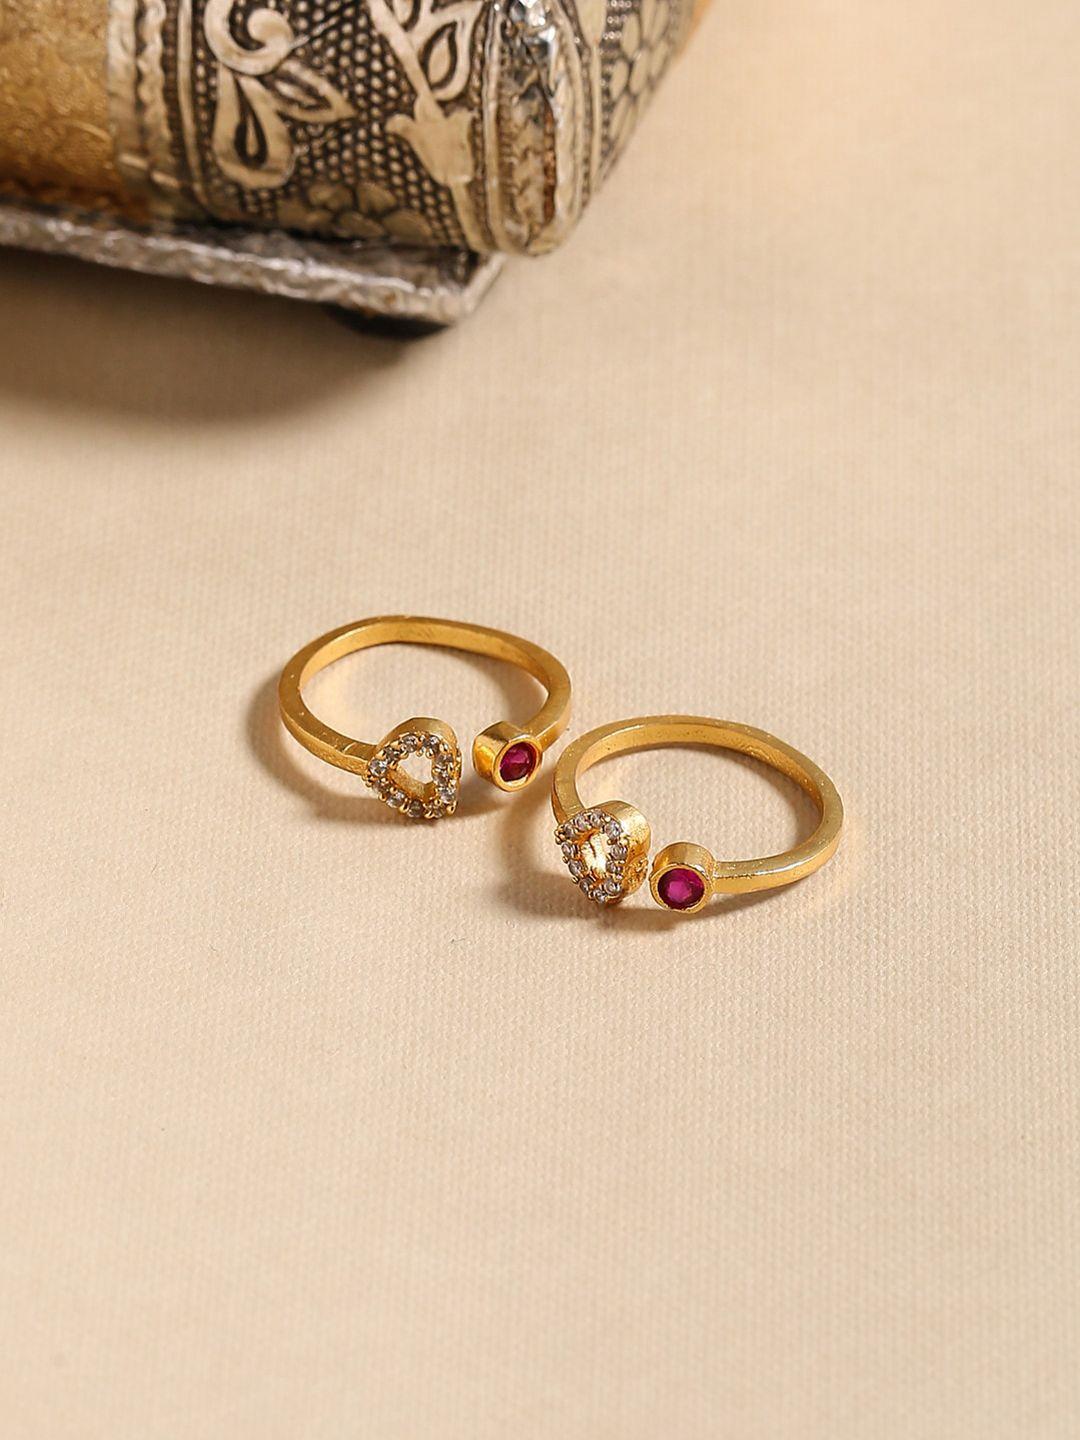 shoshaa-set-of-2-gold-plated-pink-&-white-stone-studded-handcrafted-toe-rings